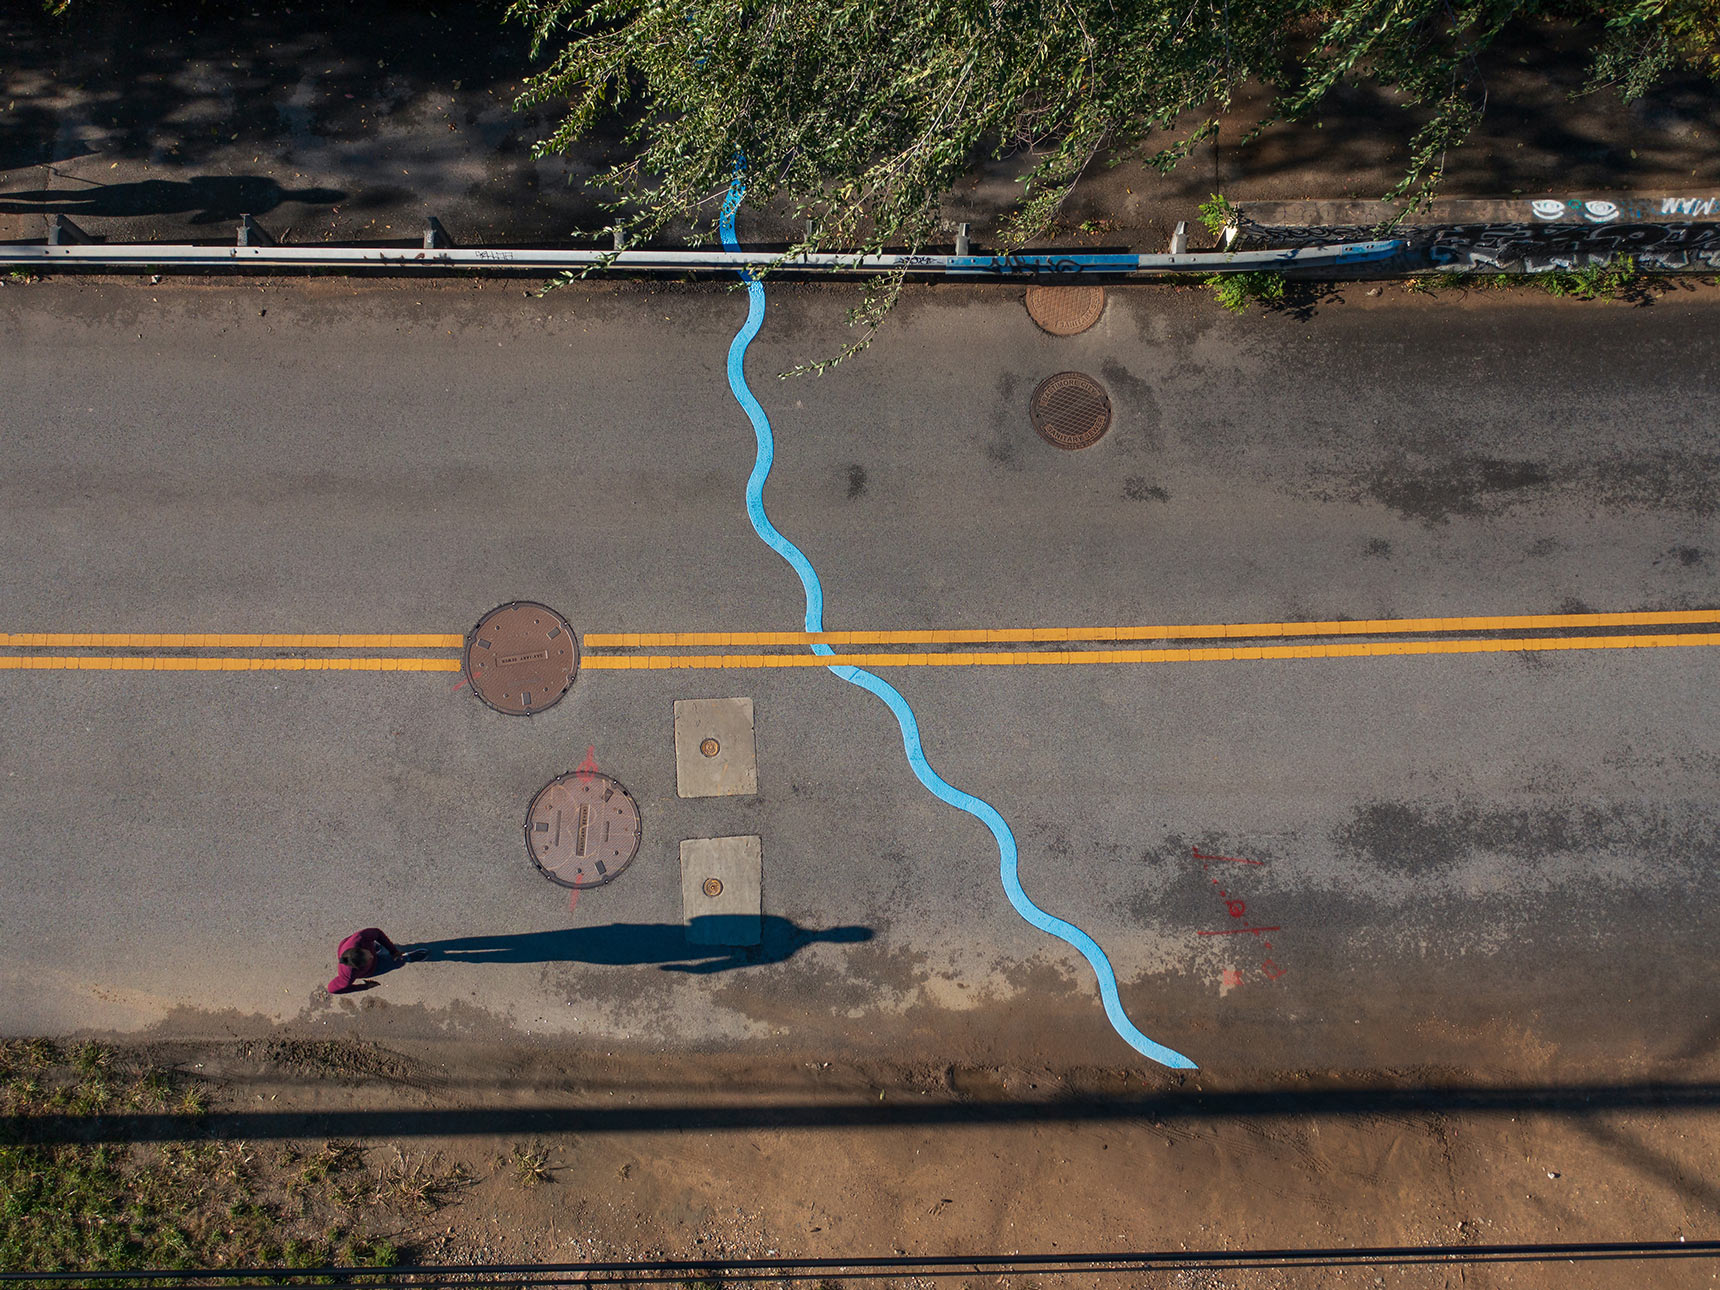 Aerial photo of a public art installation mapping the path of an underground stream. A bright blue wavy line snakes all the way across a roadway and sidewalks. The blue line appears to duck below yellow road markings. A jogger passes by casting a long early-morning shadow.